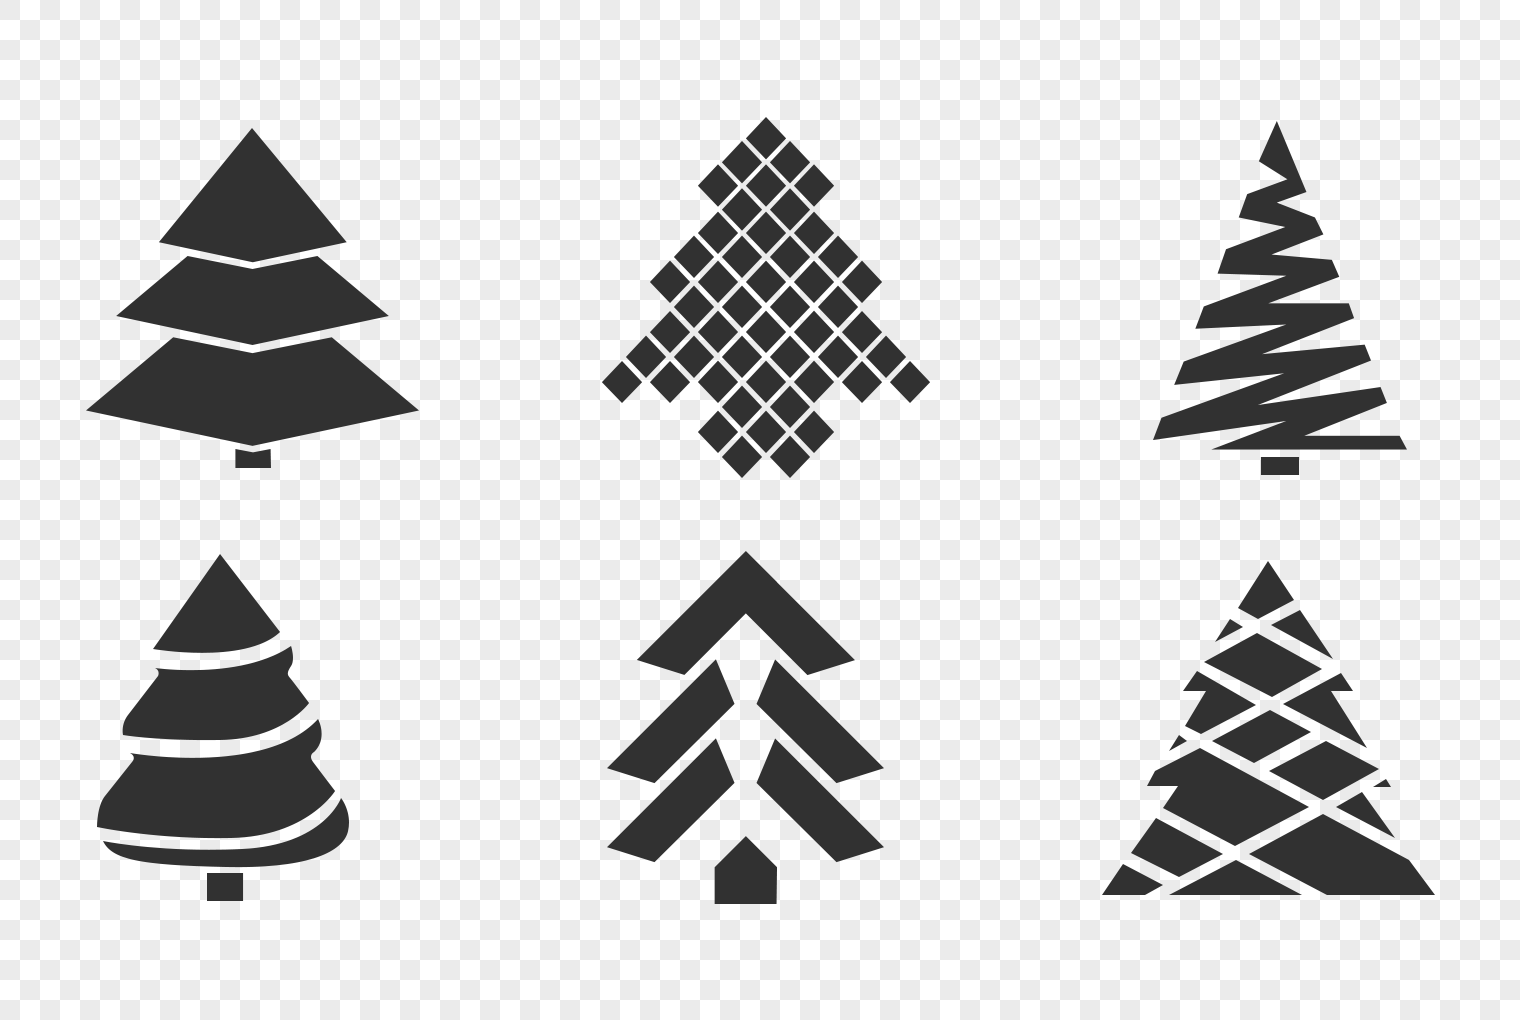 Christmas tree silhouette, tree, christmas silhouettes, pine png transparent background